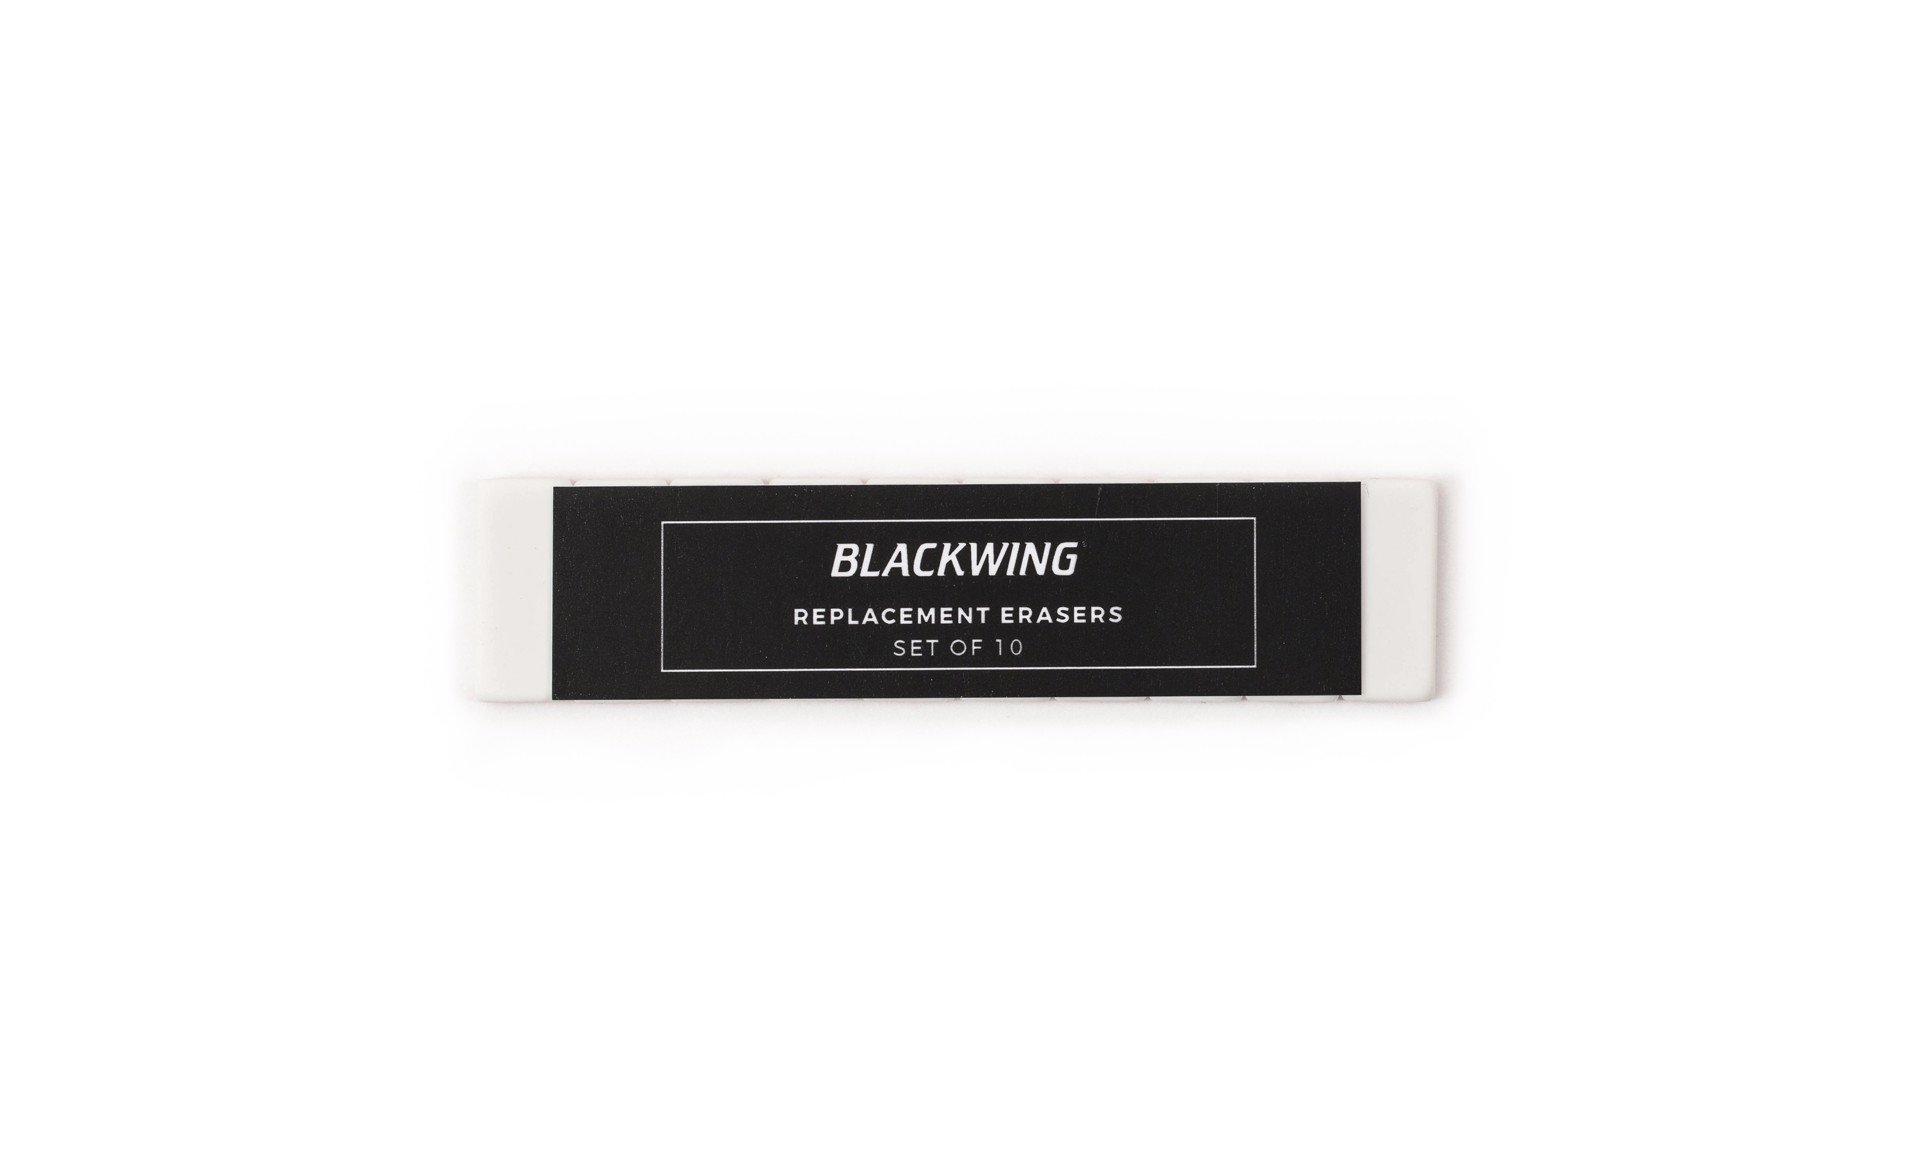 White Replacement Erasers by Blackwing